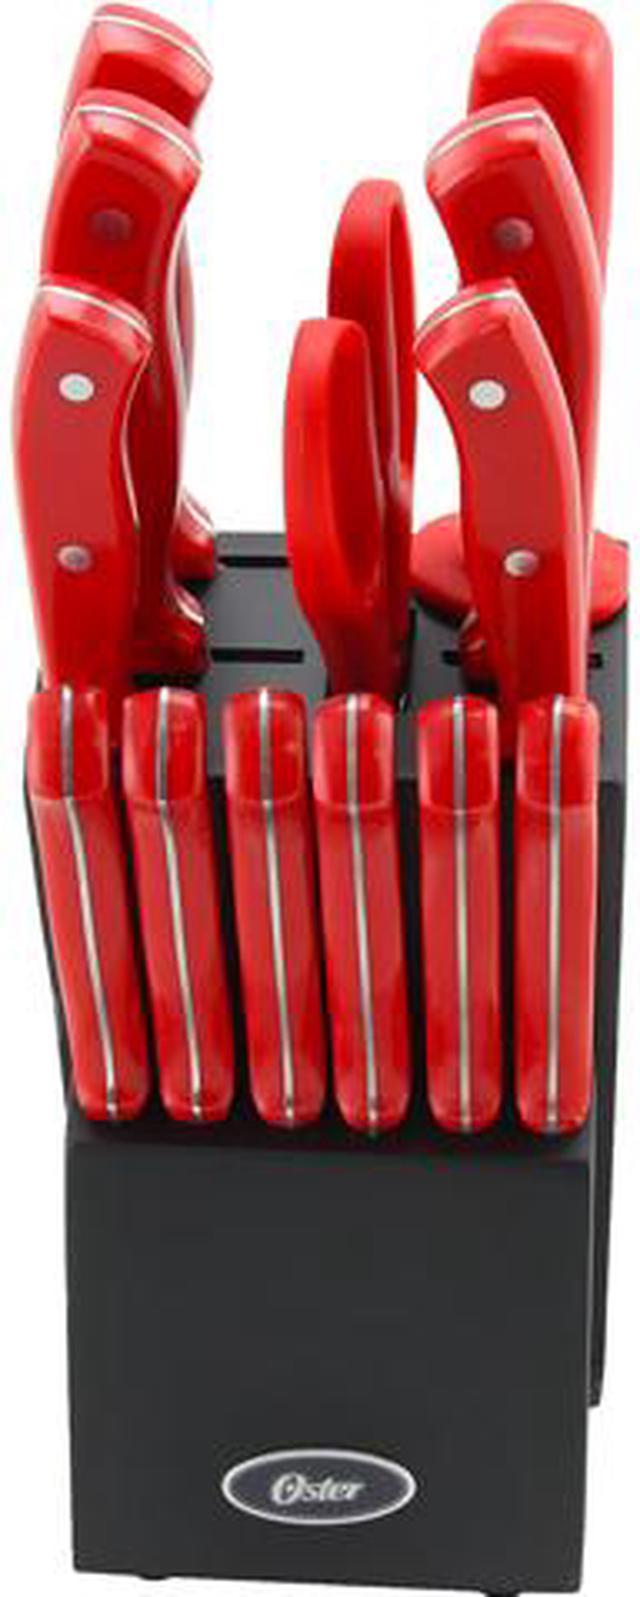 Oster Evansville 14 Piece Stainless Steel Cutlery Set with Red Handles